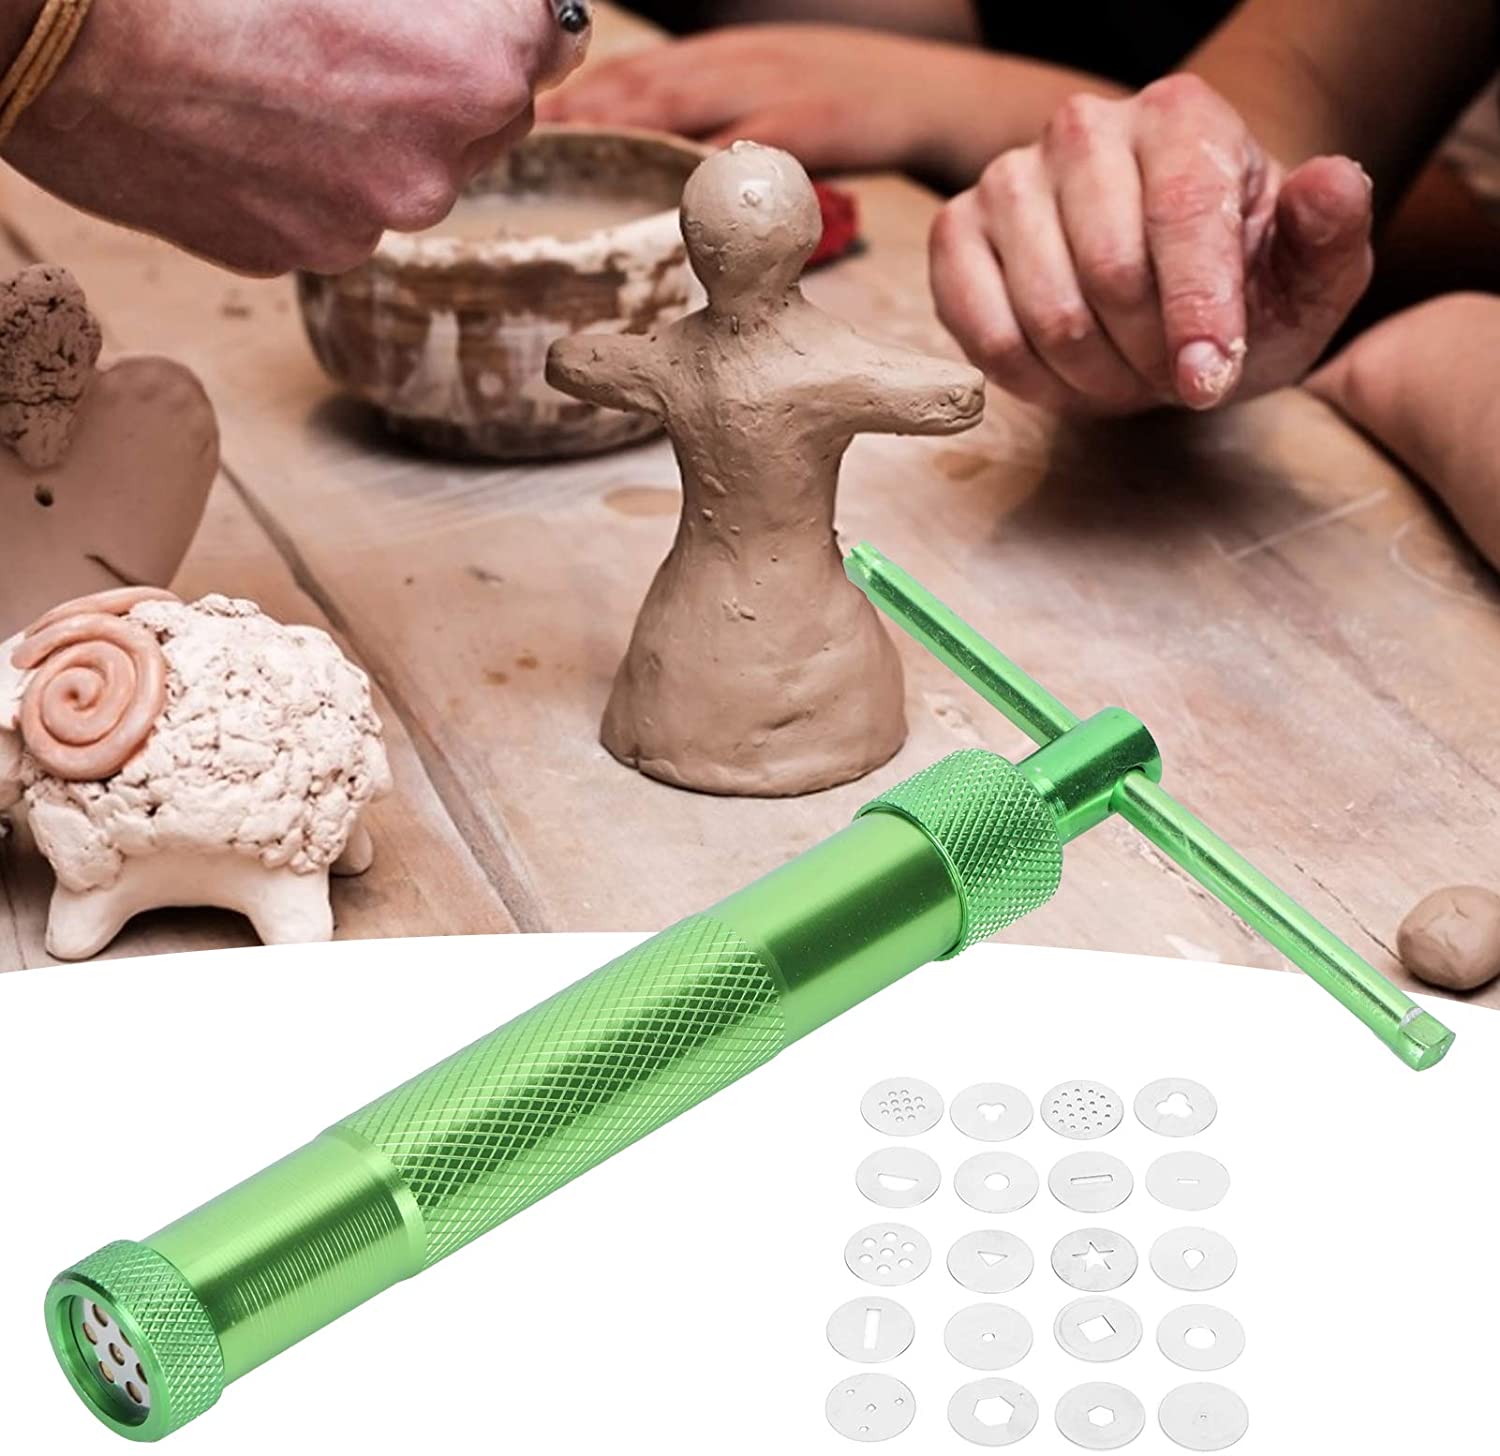 Clay Extruder Tool, Clay Tool Sugar Paste Extruder Fondant Extruder Cake Decor Tool Set Rotary Crowded Mud Clay Extruder Ceramics Pottery Clay